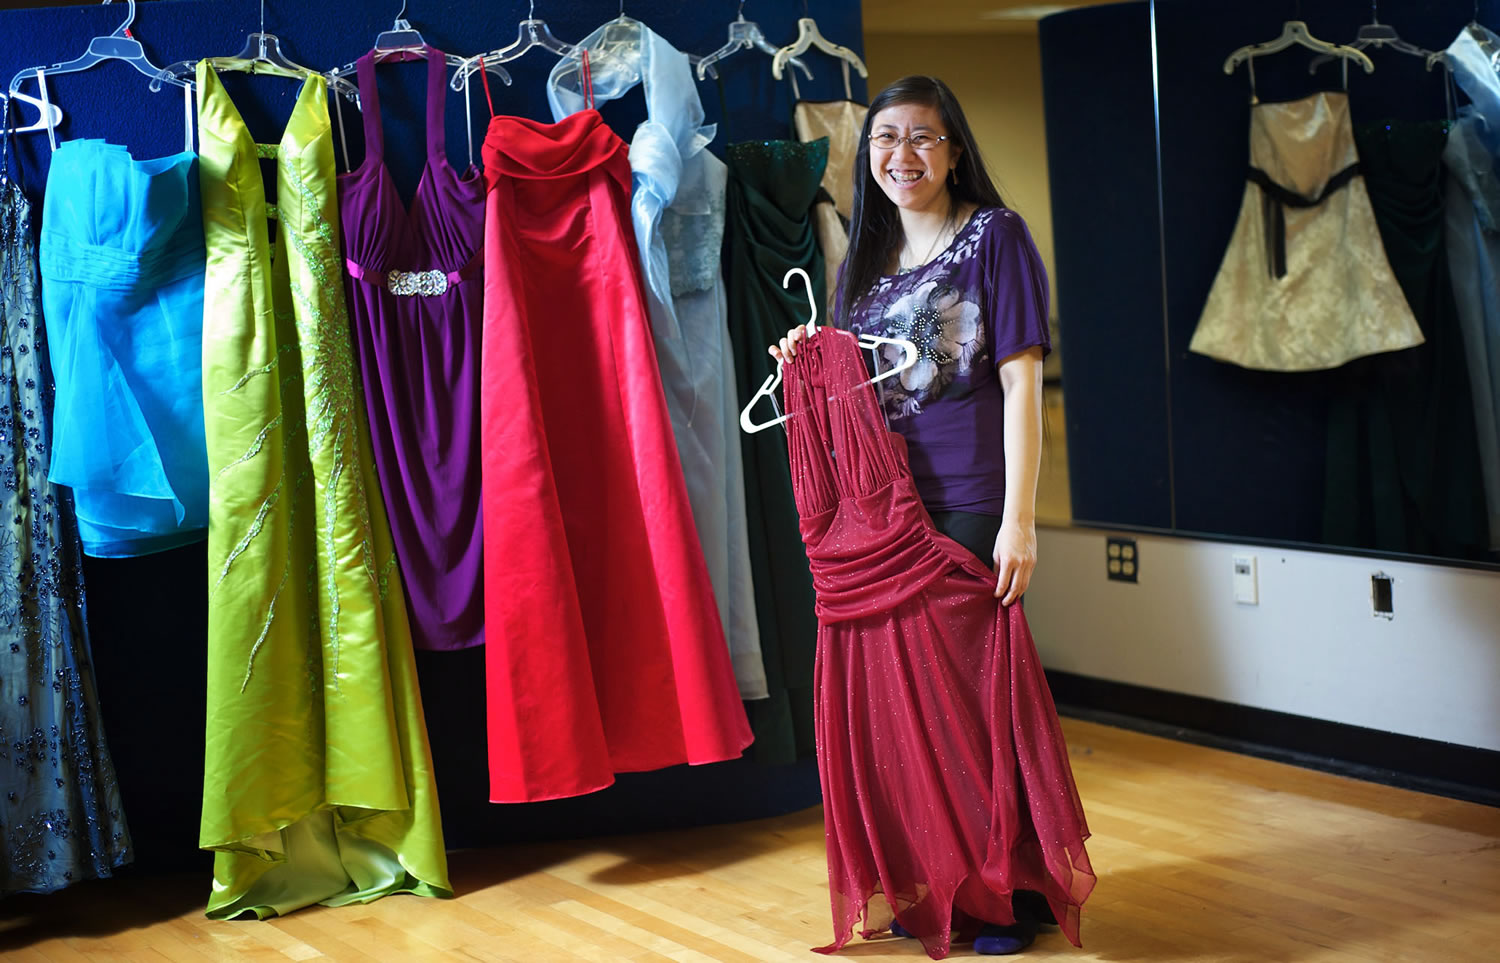 Christina Chen, a senior at Hudson's Bay High School, organizes prom dresses for Saturday's event offering $5 prom dresses to girls attending Vancouver school district high schools.